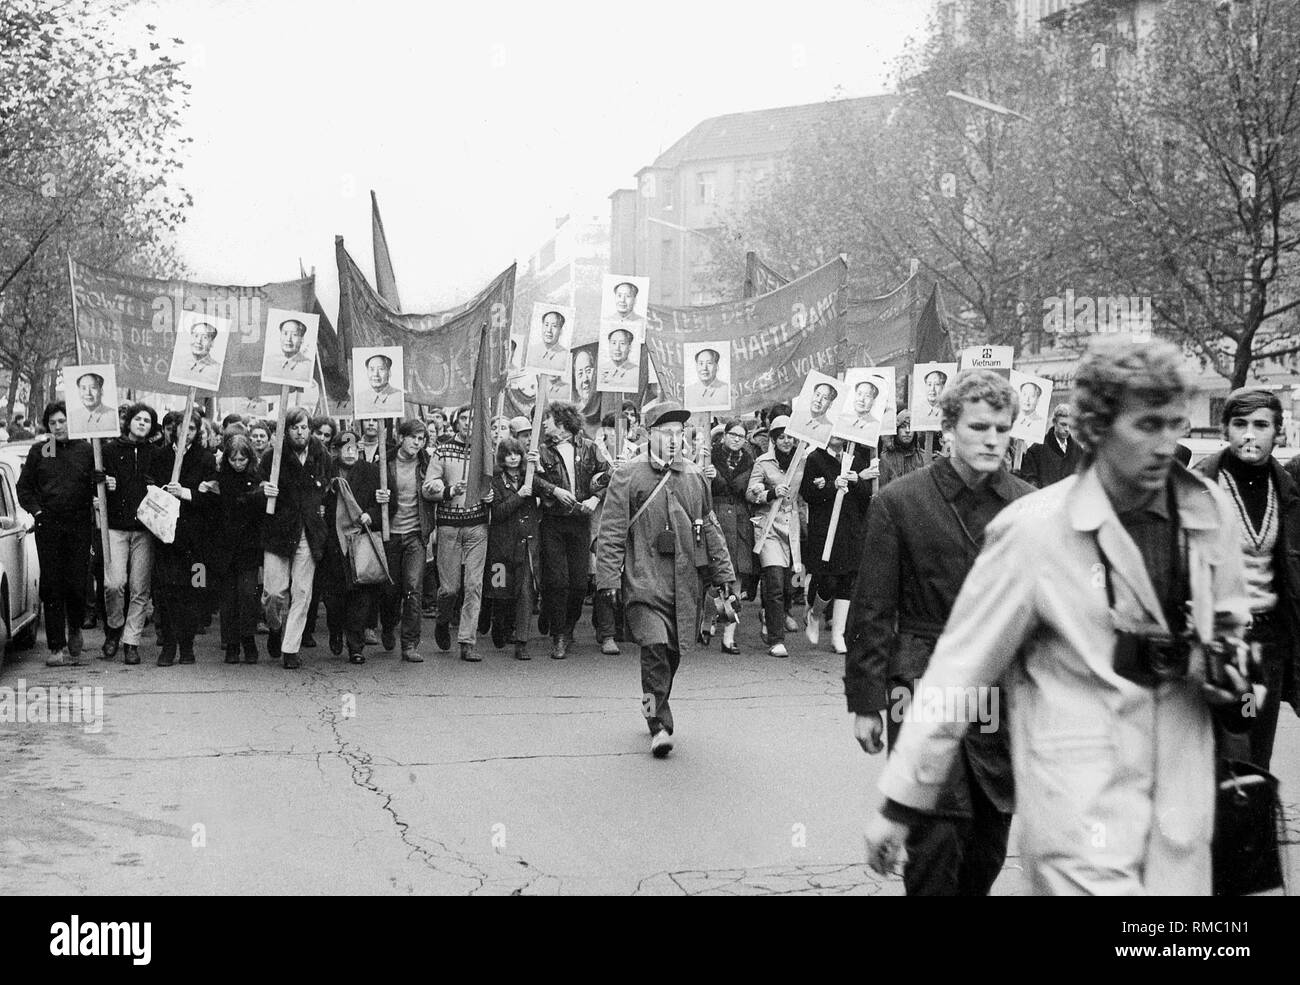 Demonstration march of the West Berlin Maoists against the war in Vietnam. Stock Photo